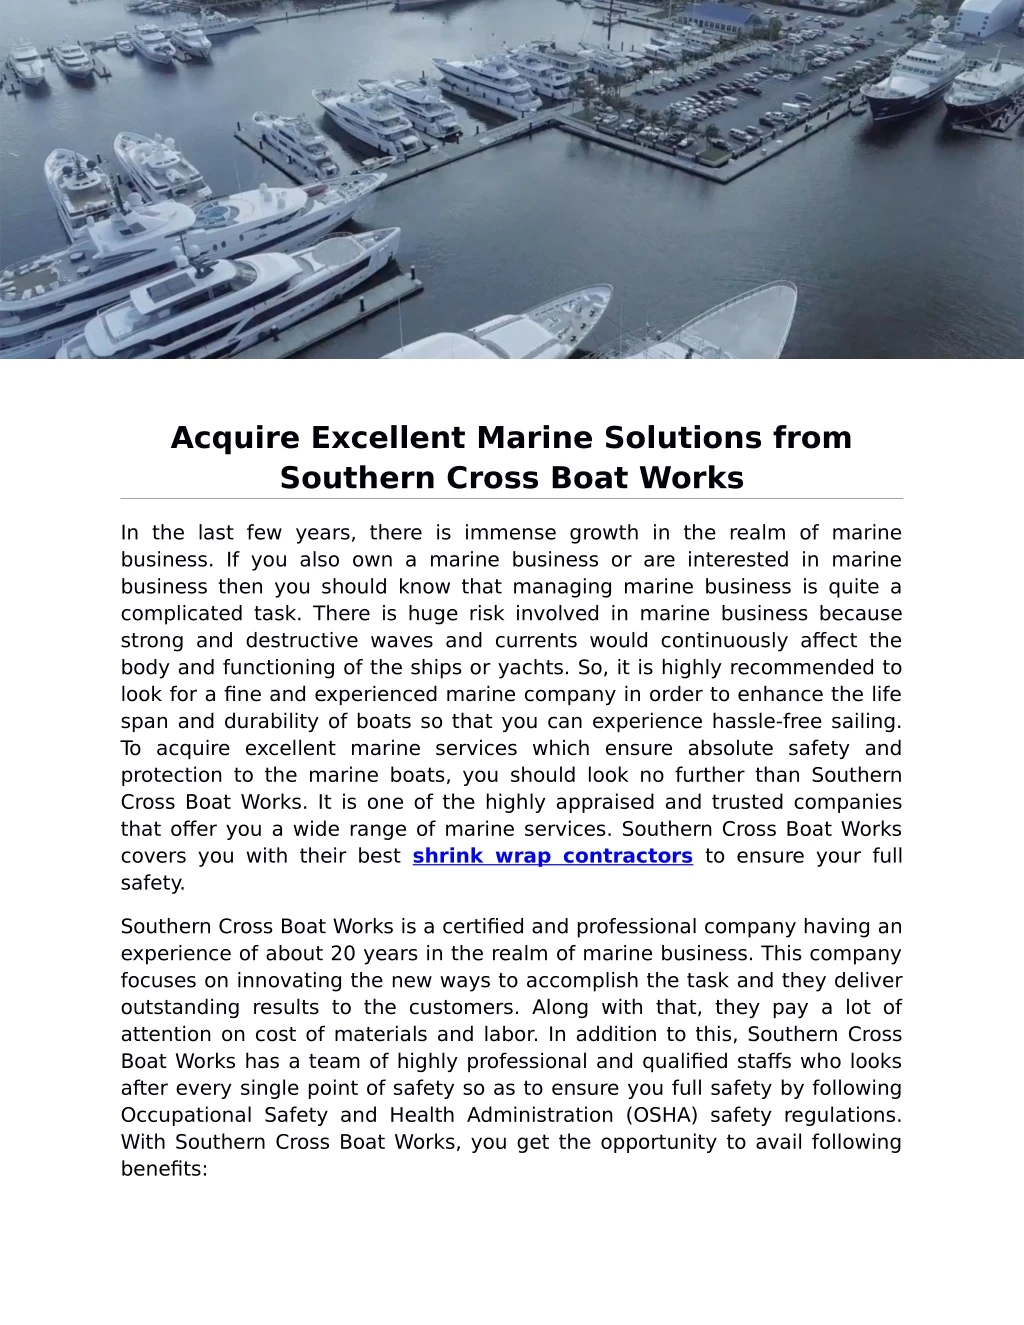 acquire excellent marine solutions from southern